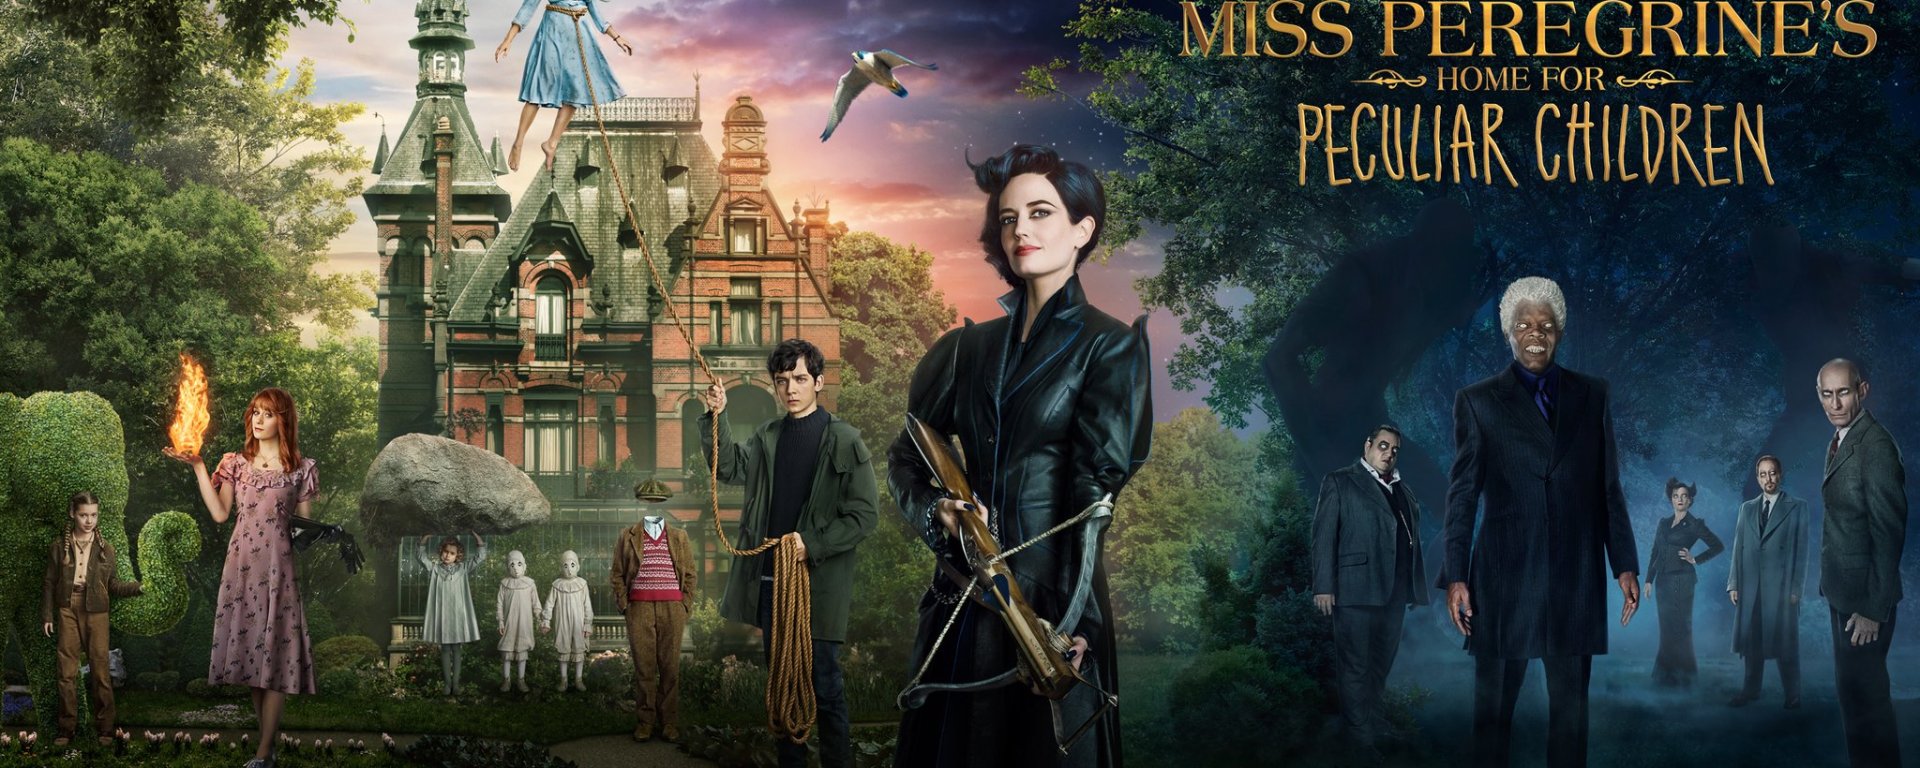 miss-peregrines-home-movie-banner